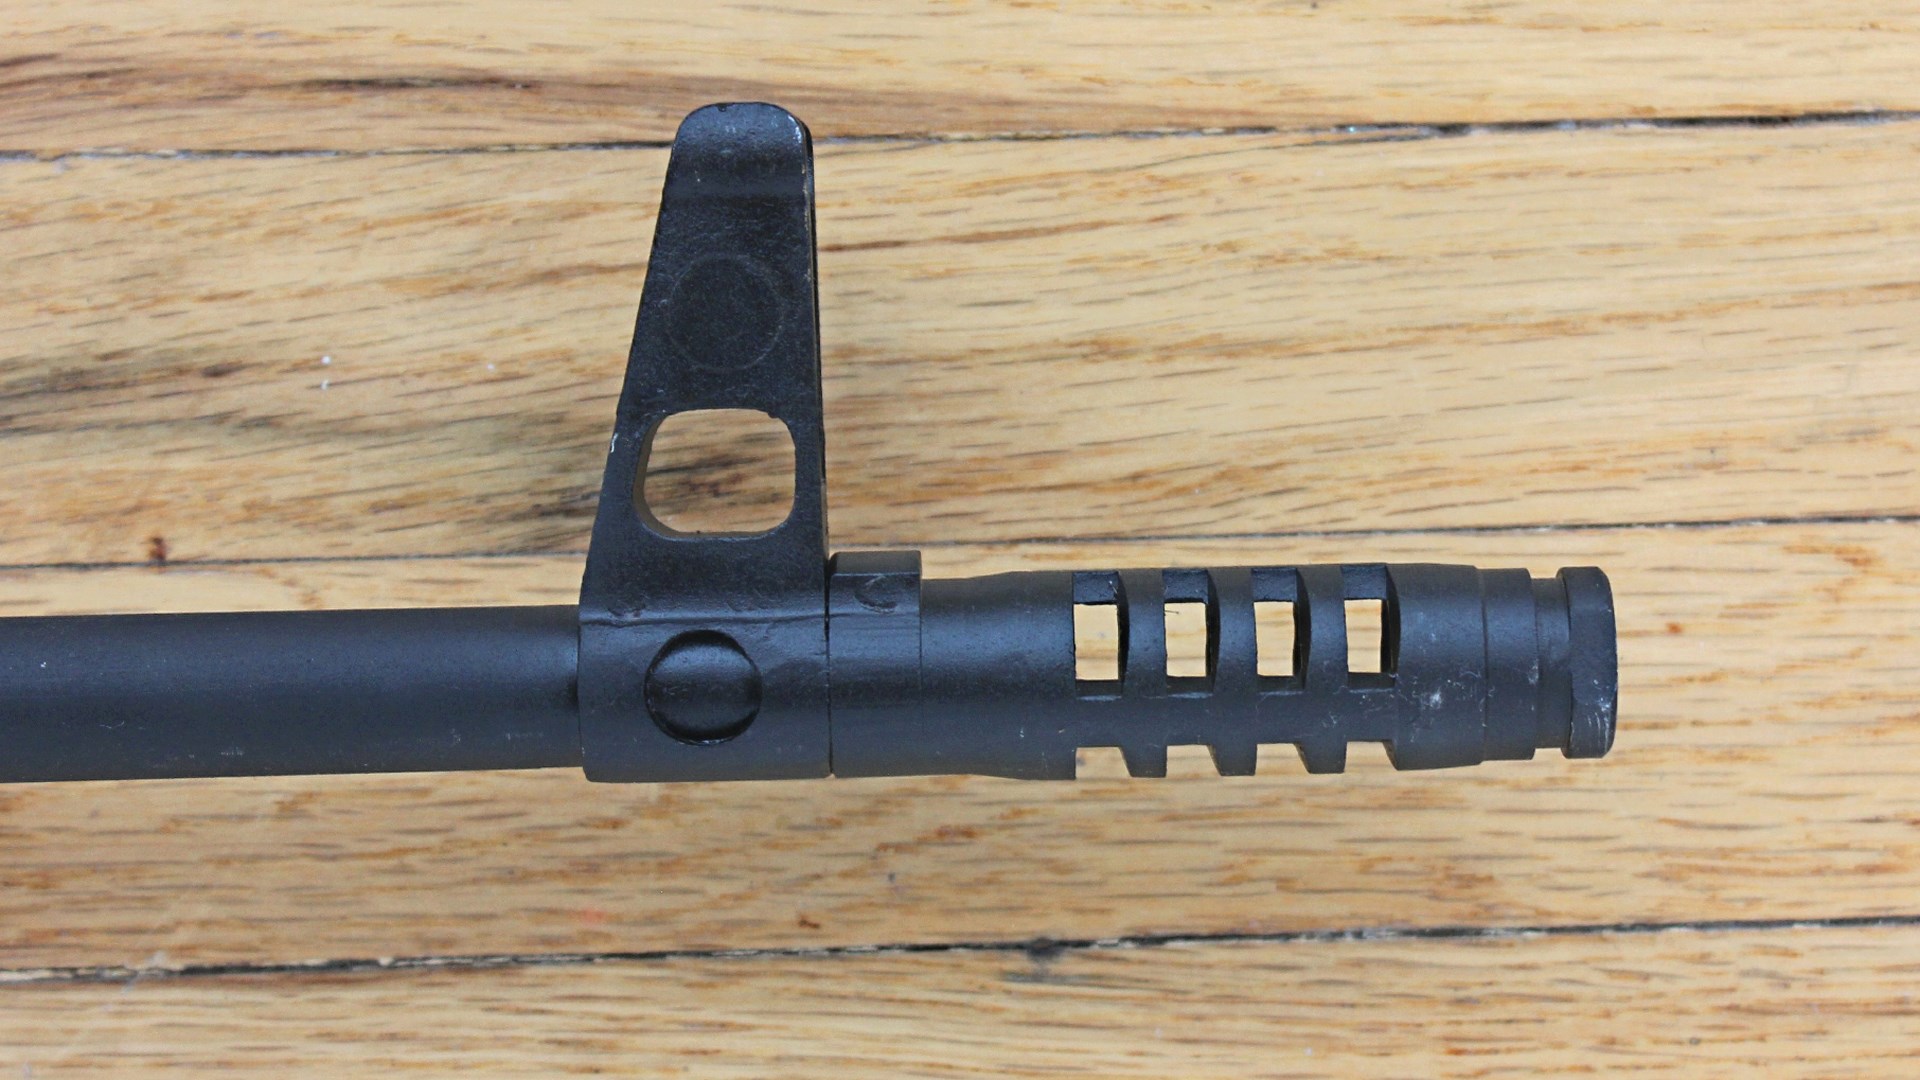 Century Arms PSL 54 muzzle brake front sight shown on wood floor